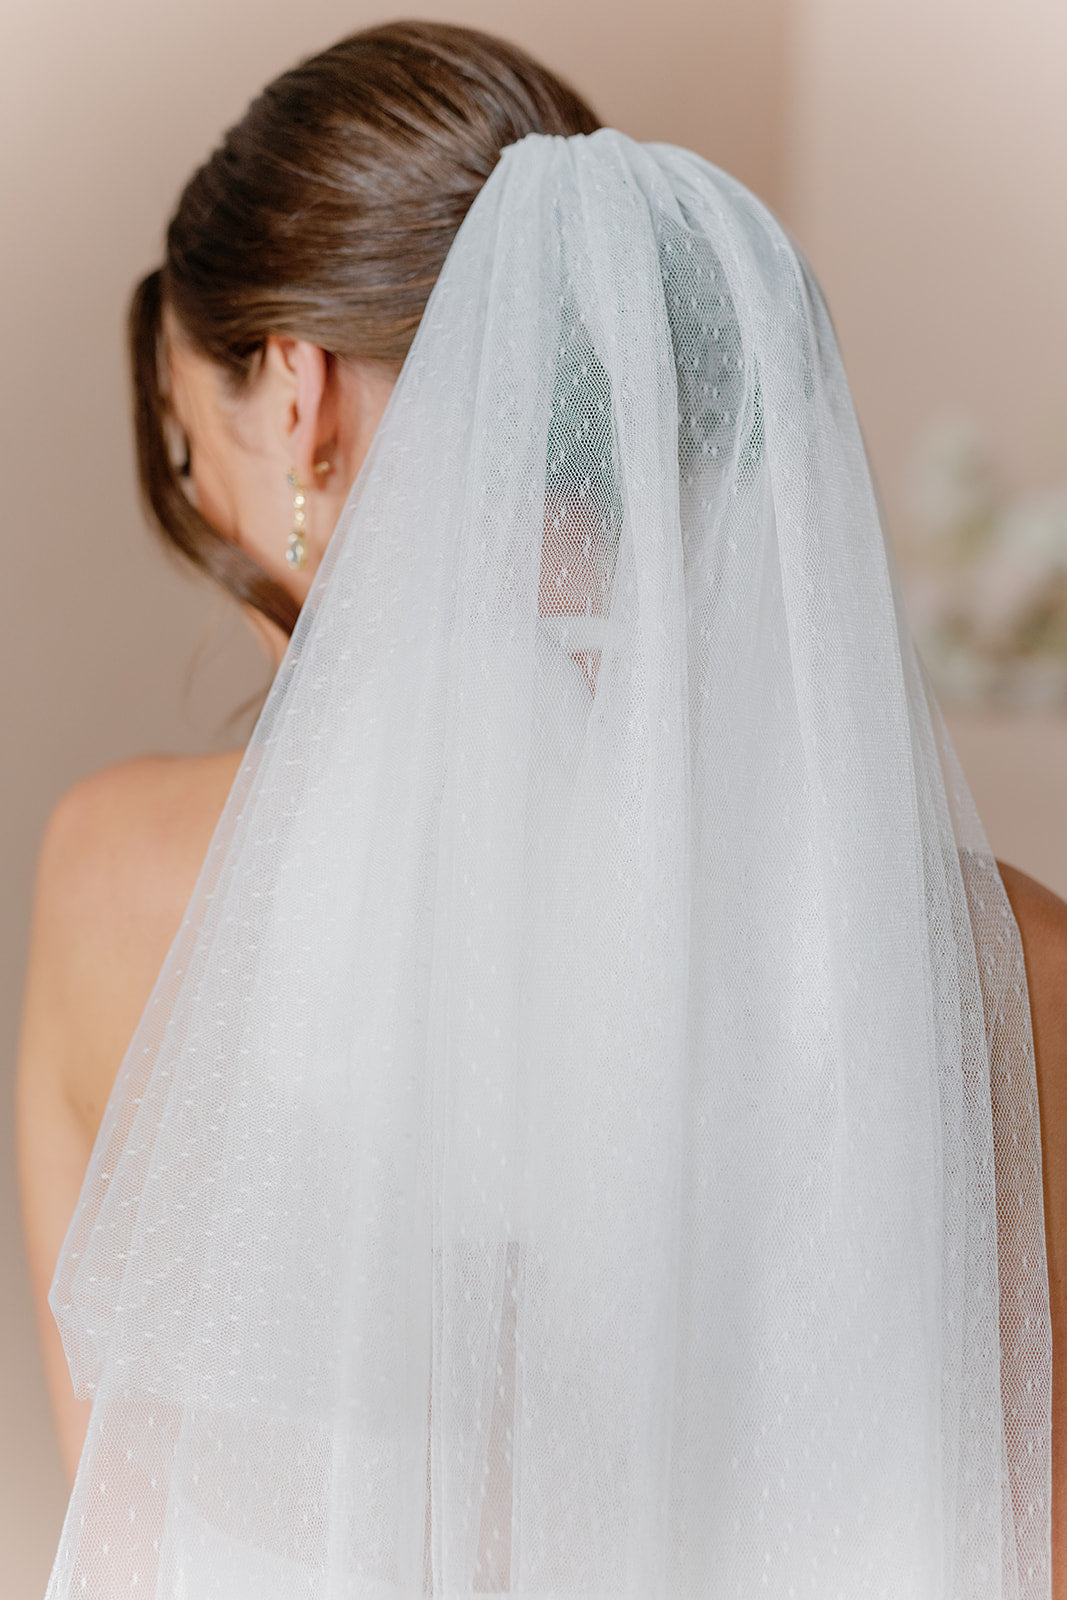 Bridesmaid Dress at Revelry | Classic Tulle Fingertip Veil | Ready to Ship